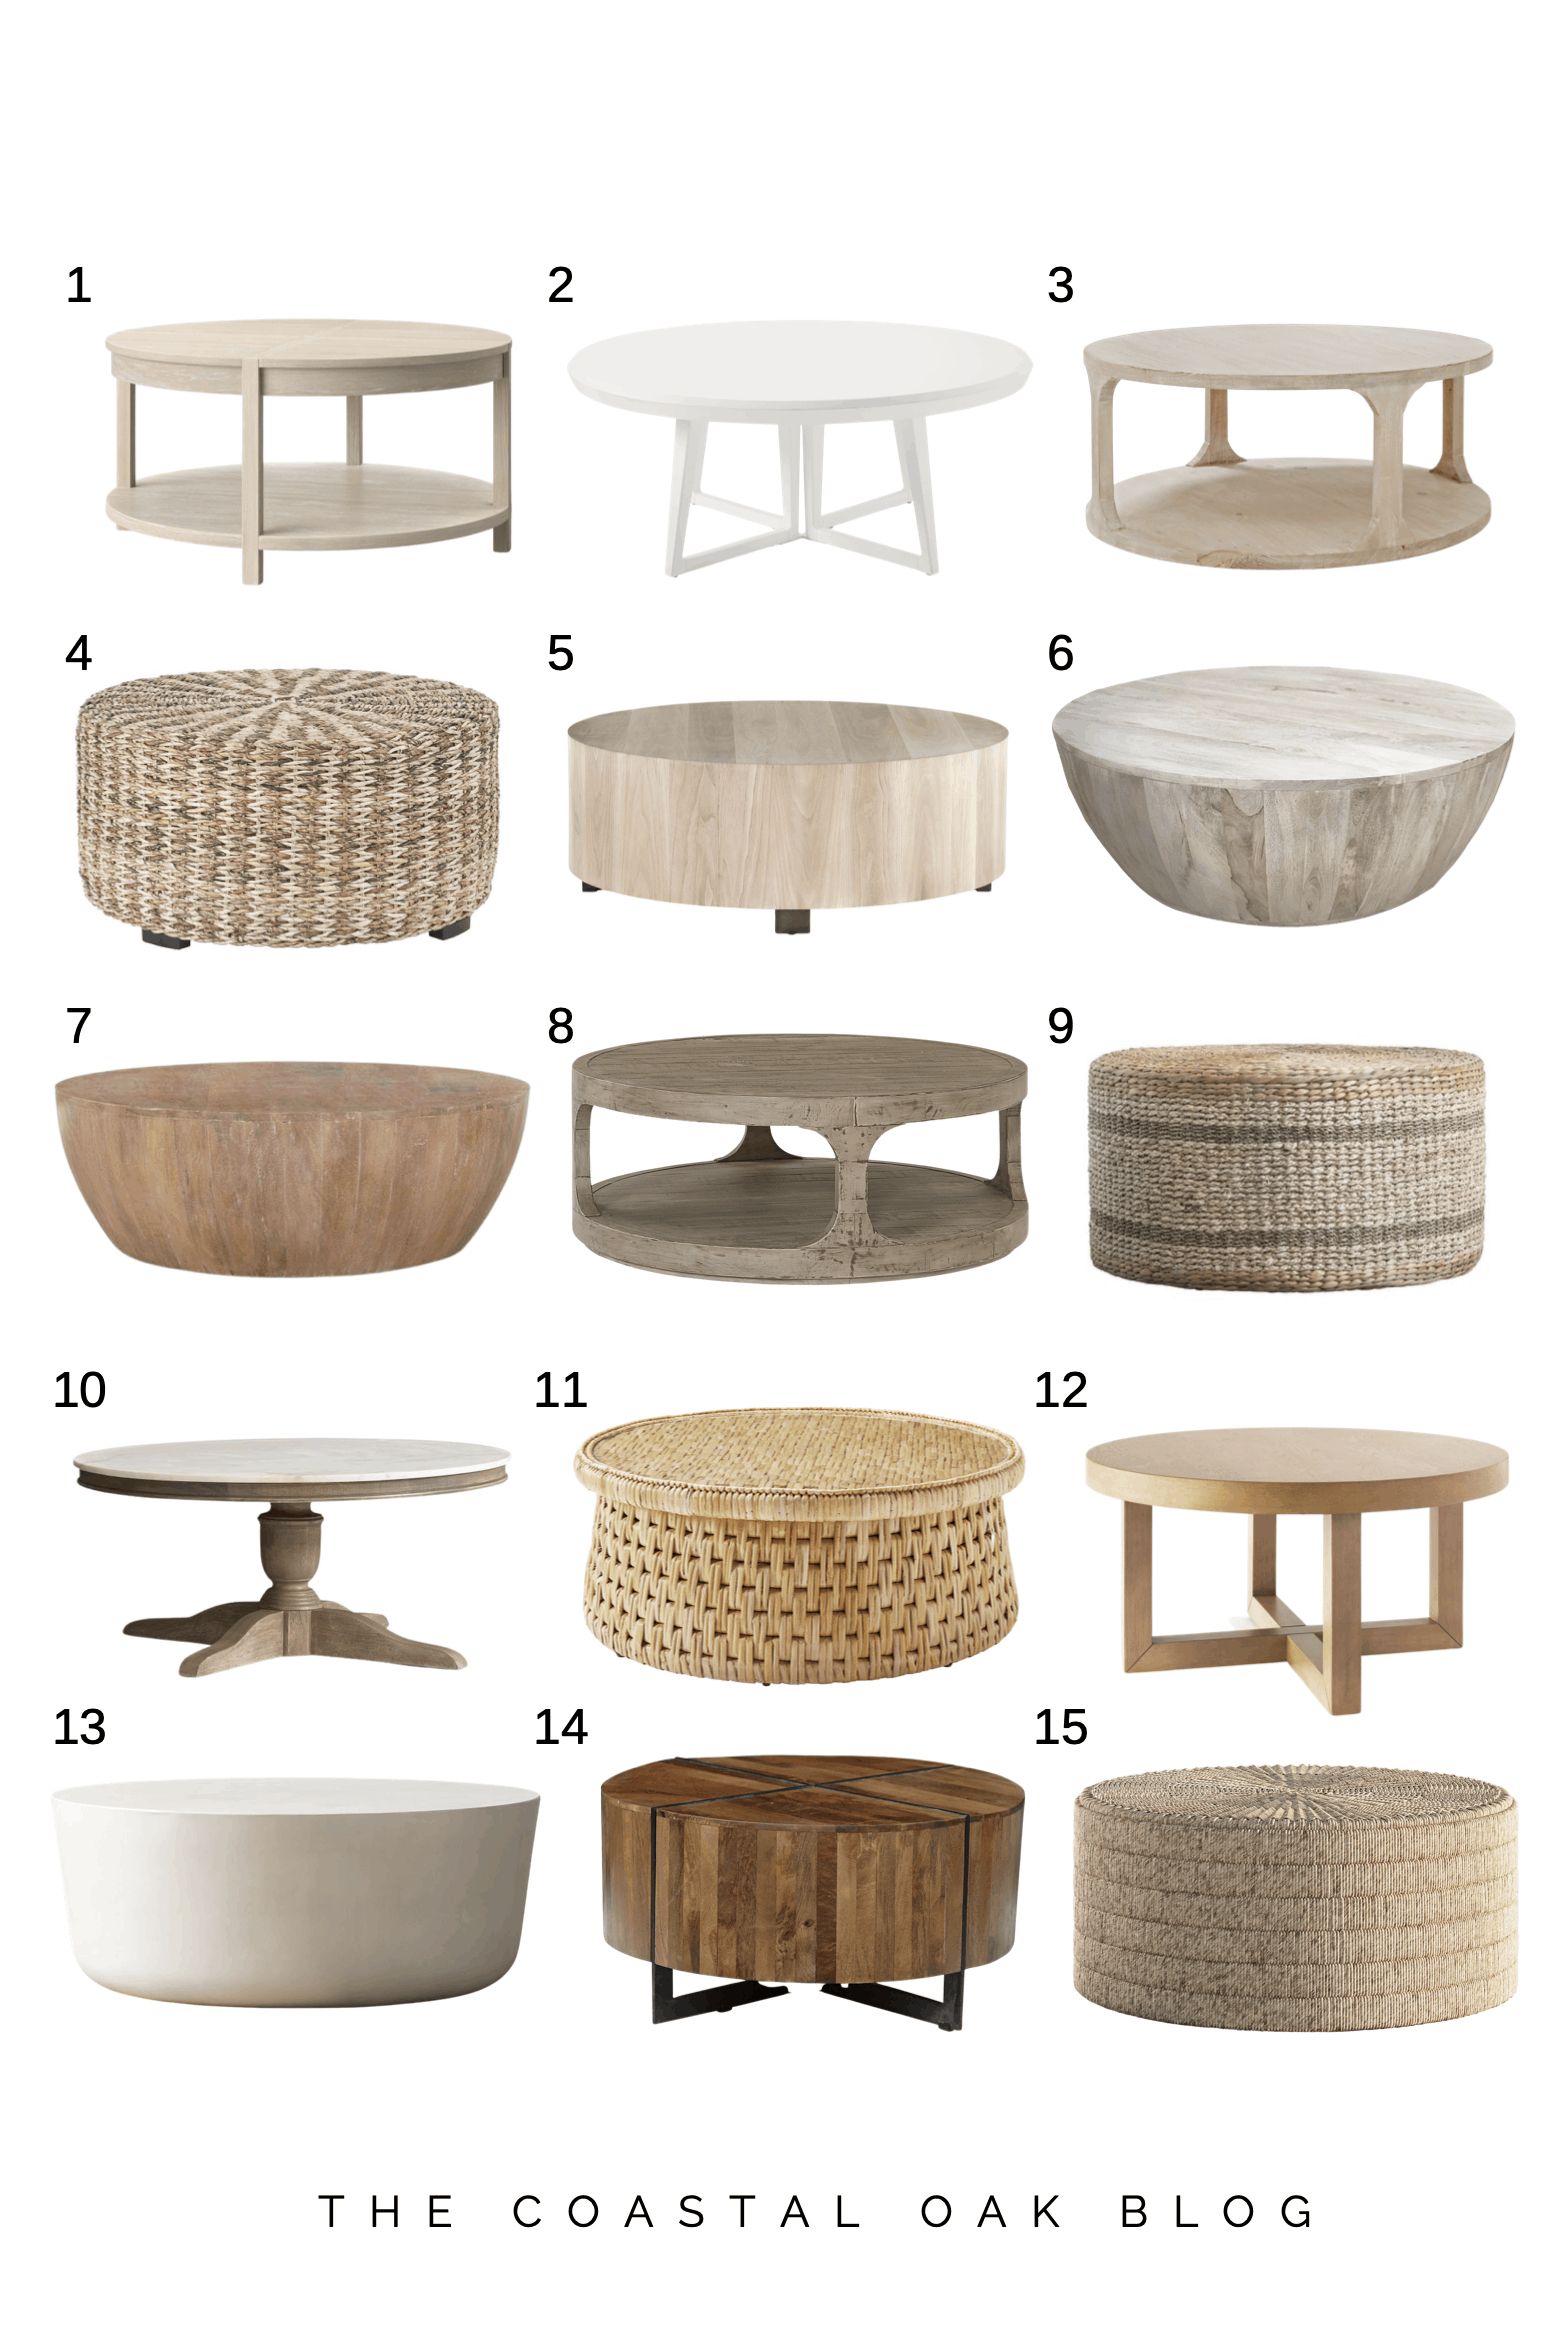 15+ Round Coffee Tables For Any Budget | The Coastal Oak Throughout Modern Round Coffee Tables (View 3 of 20)